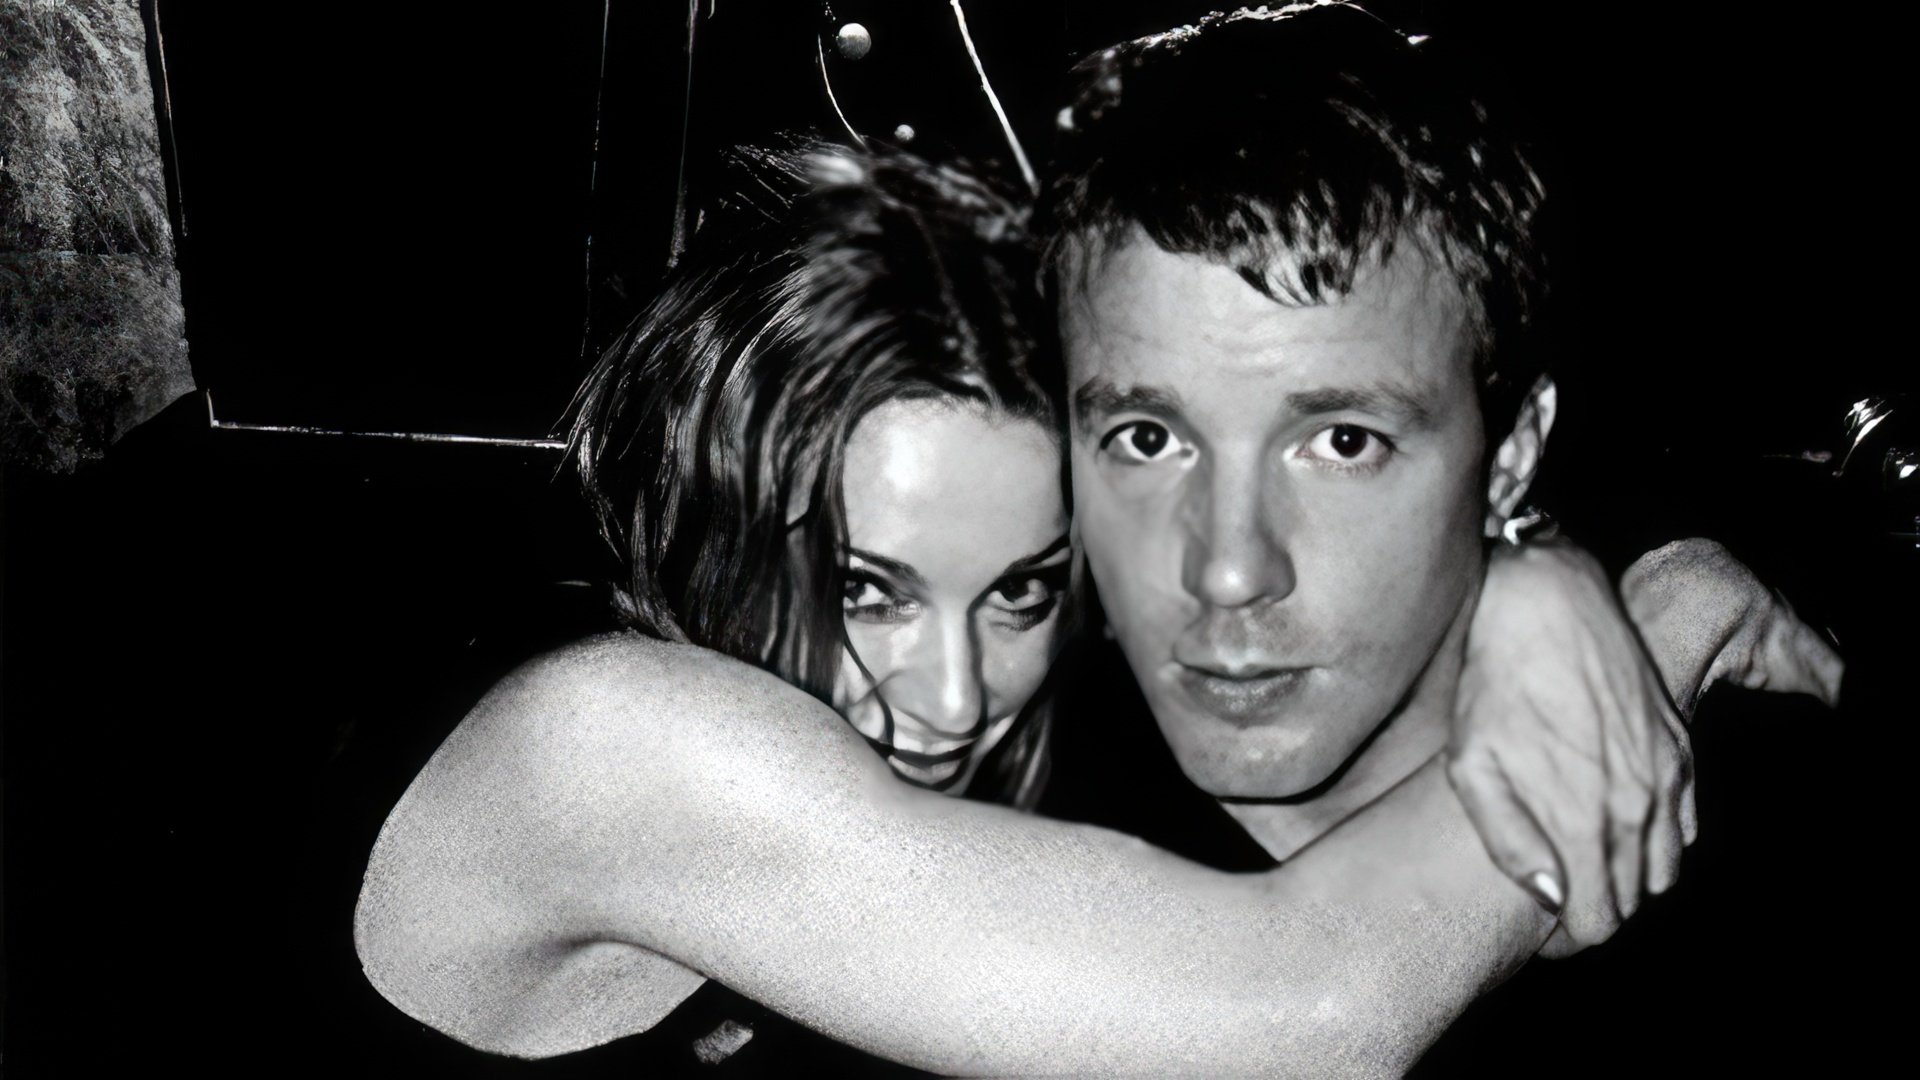 Guy Ritchie and Madonna began dating in 1999